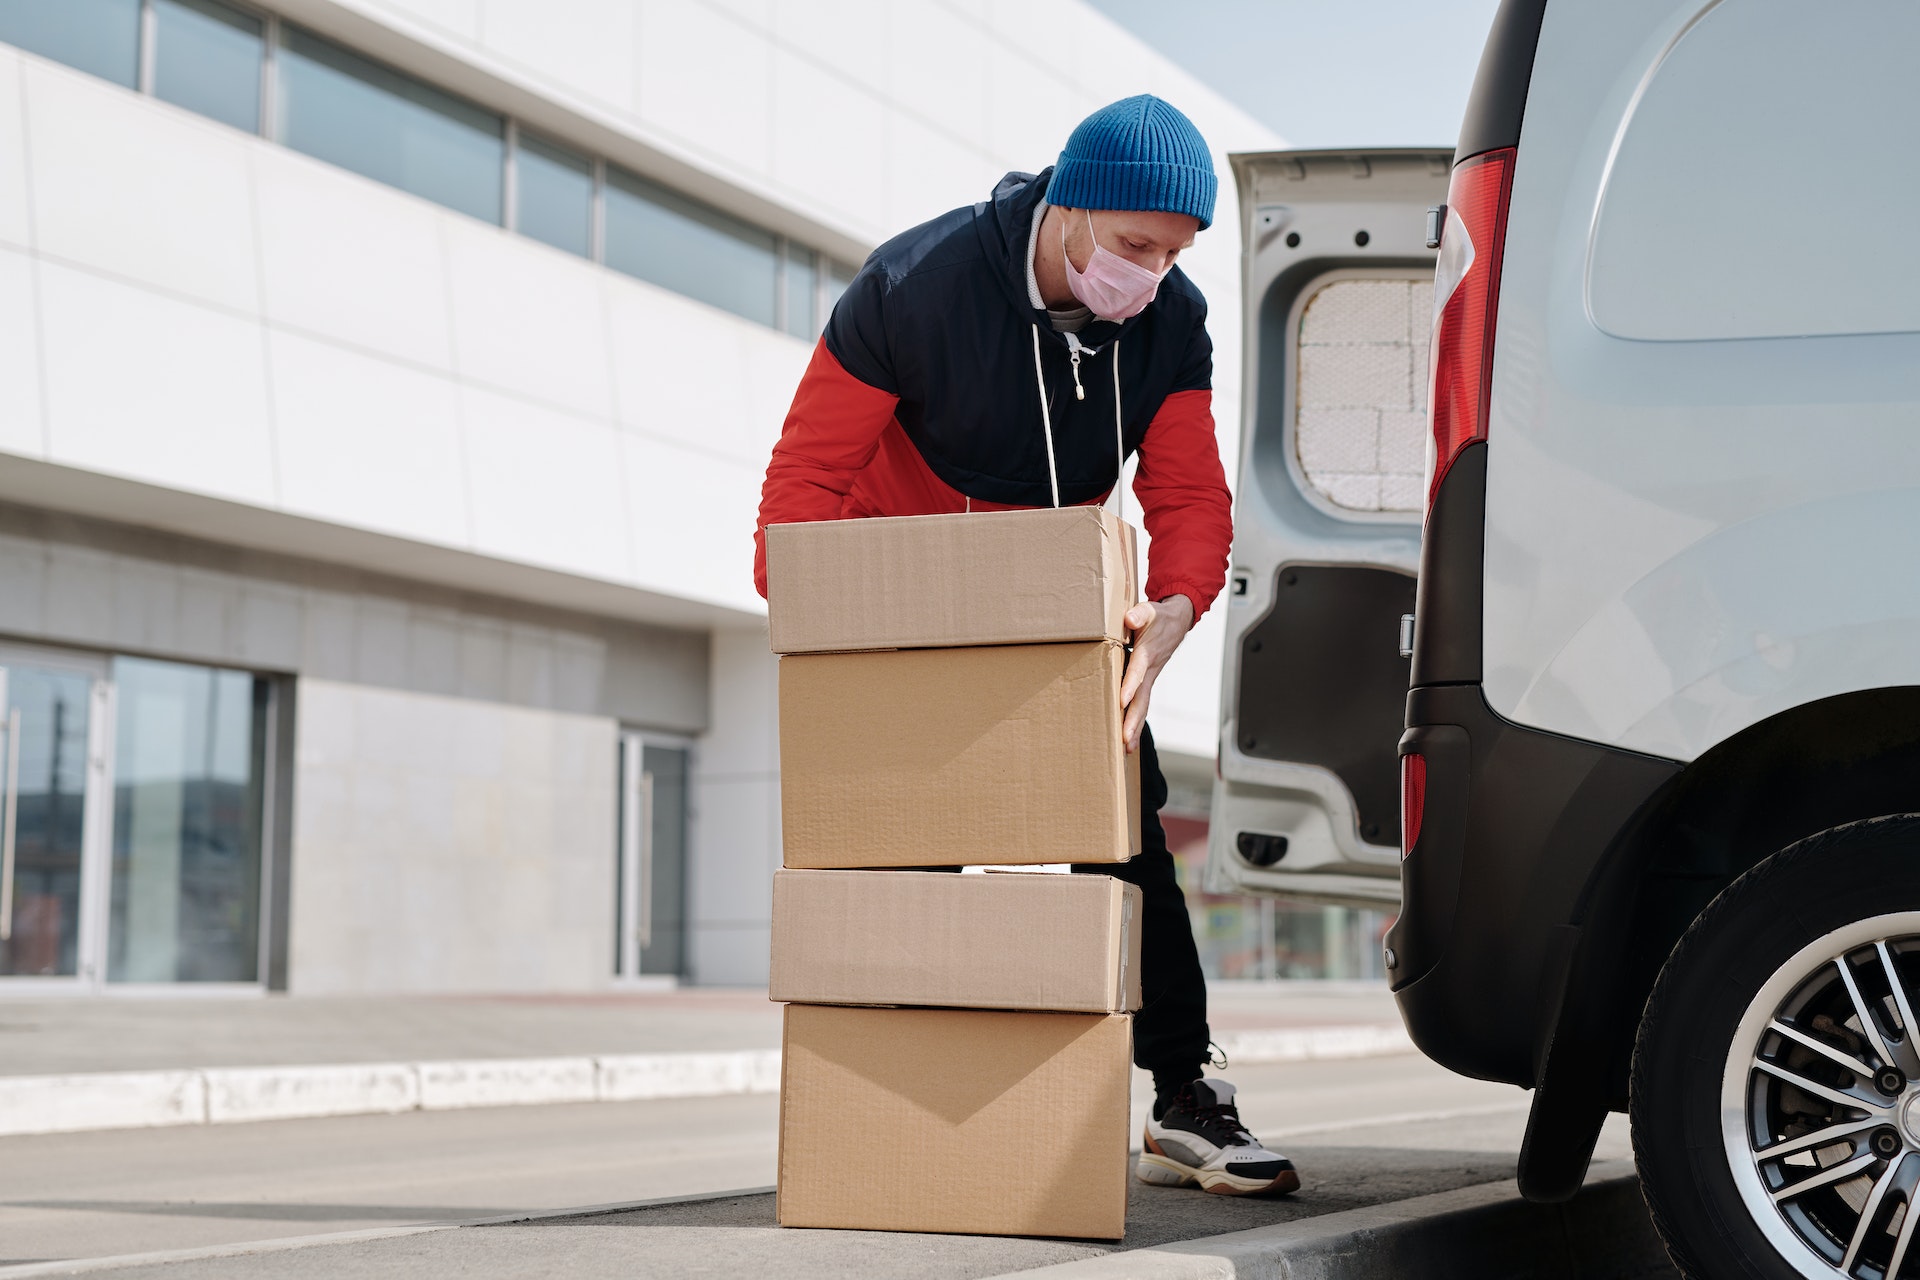 A delivery man filling the van with packages